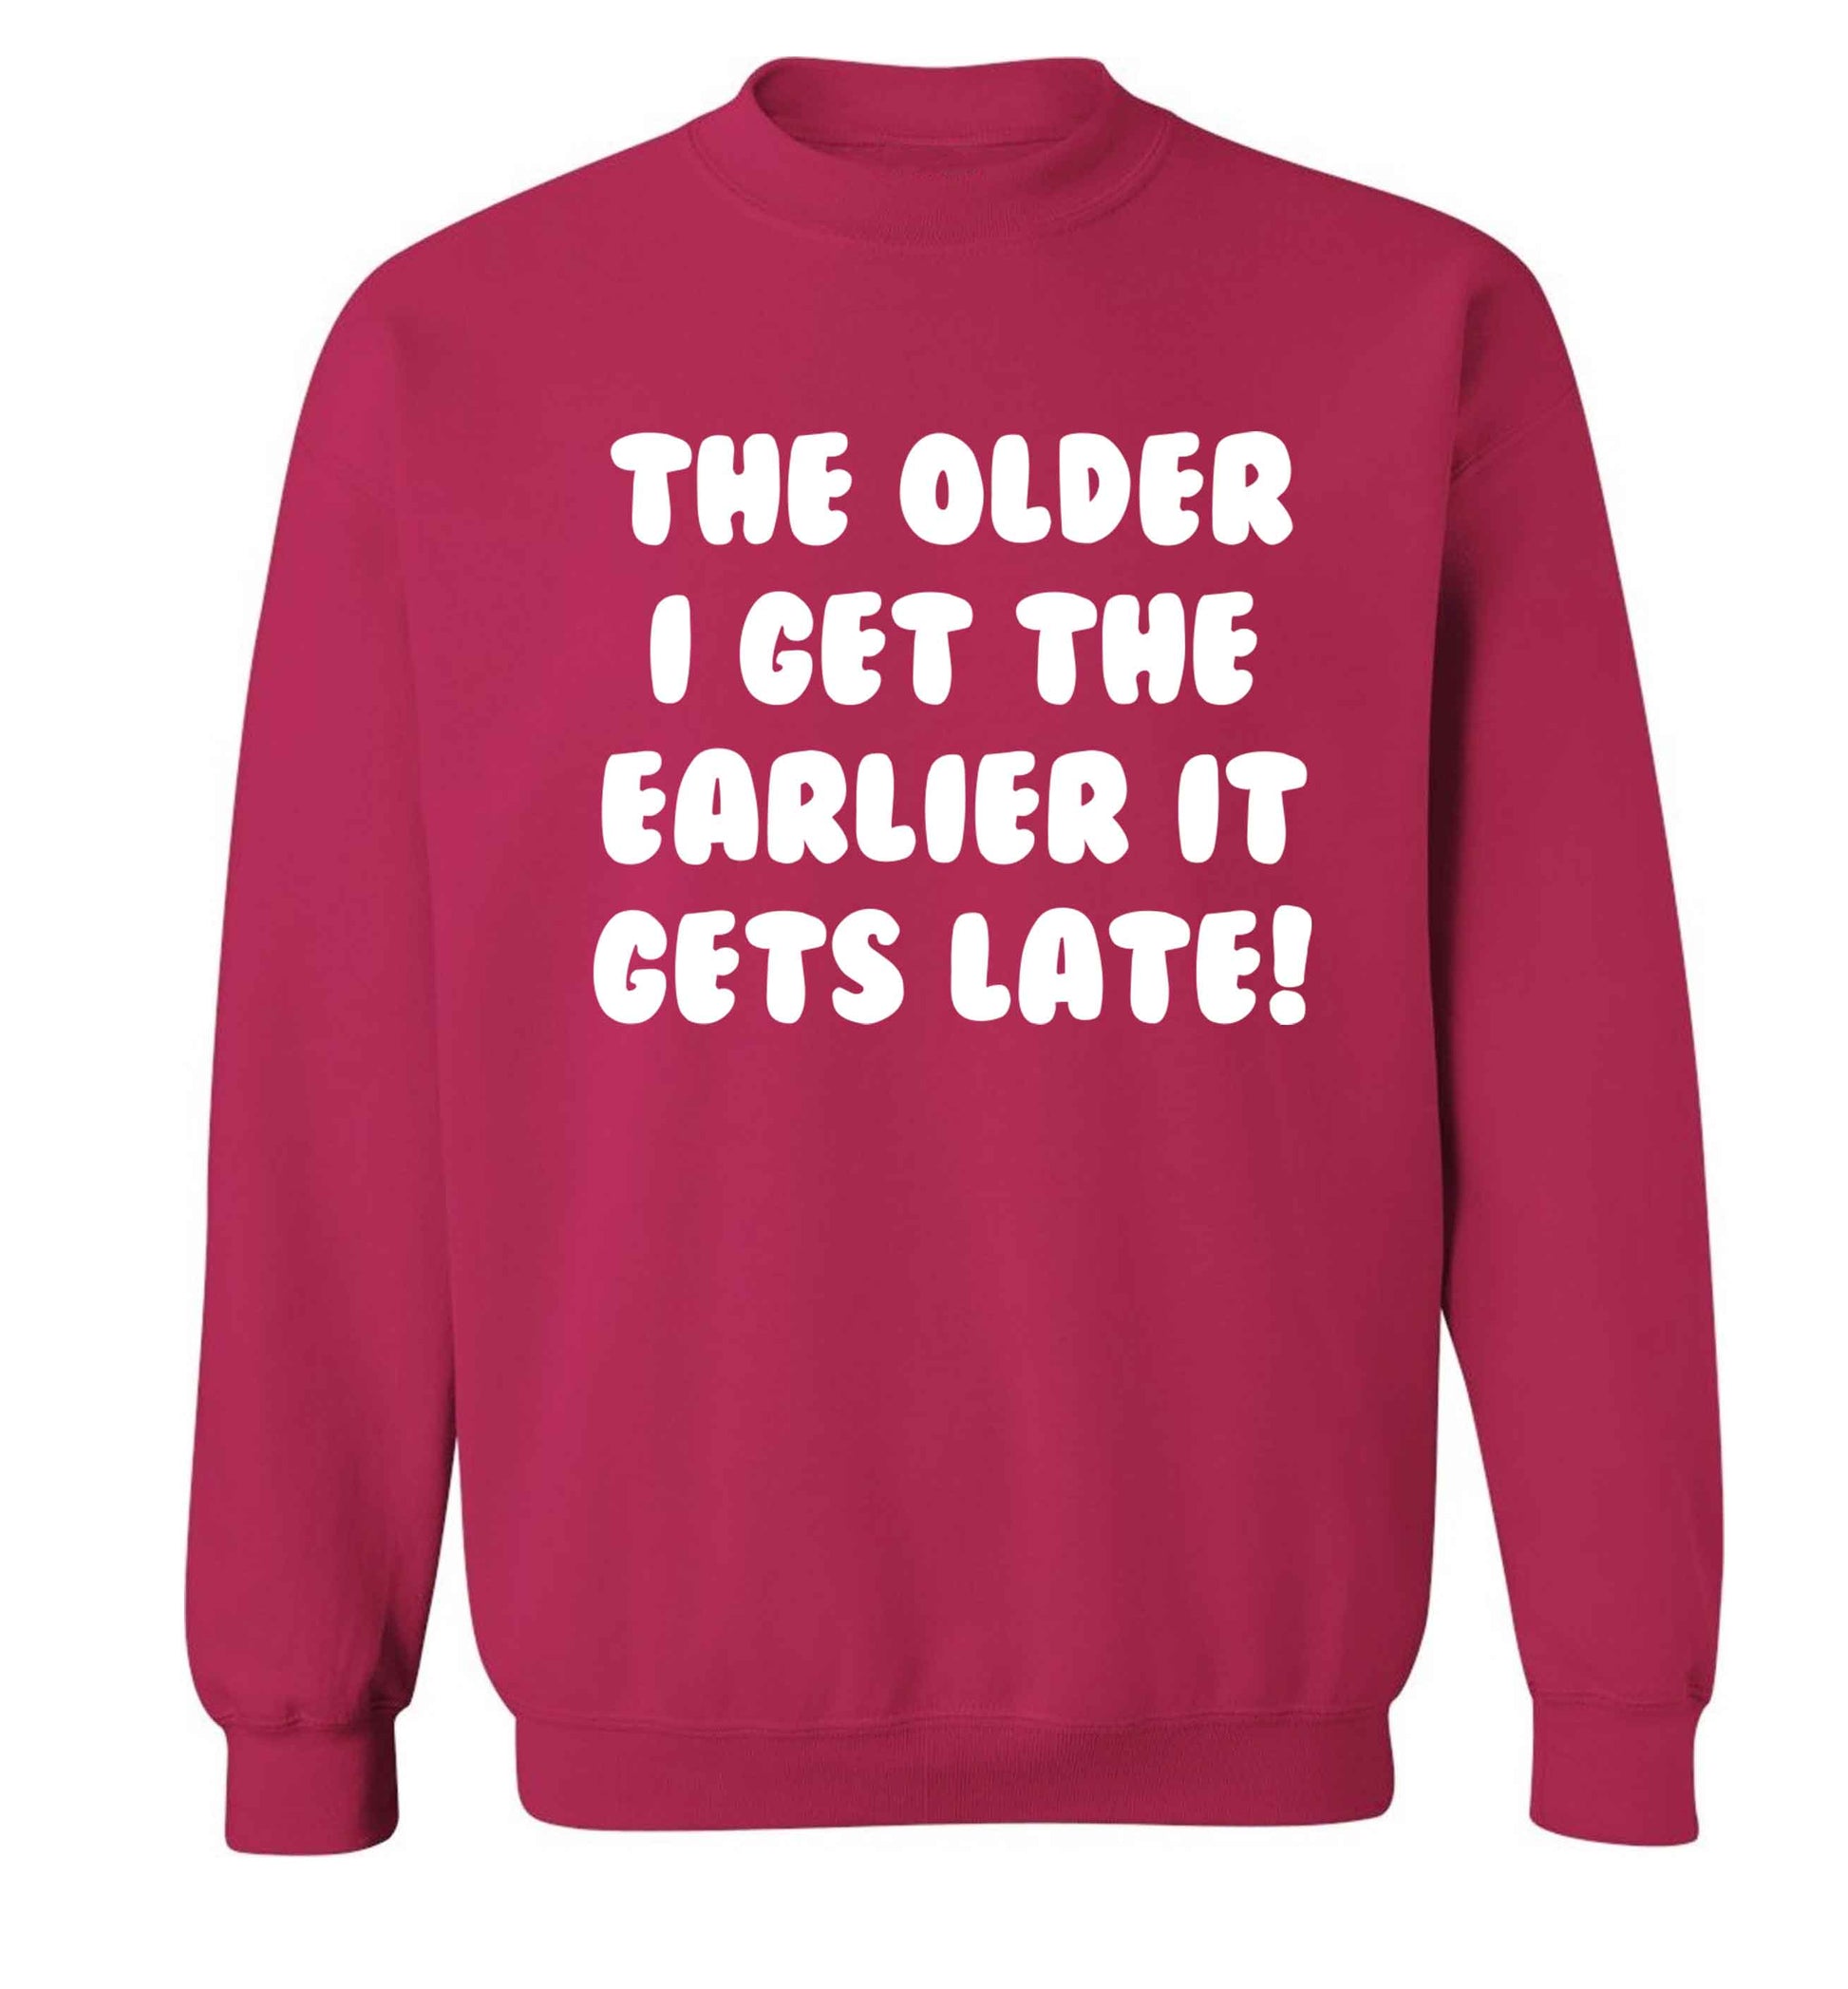 The older I get the earlier it gets late! Adult's unisex pink Sweater 2XL